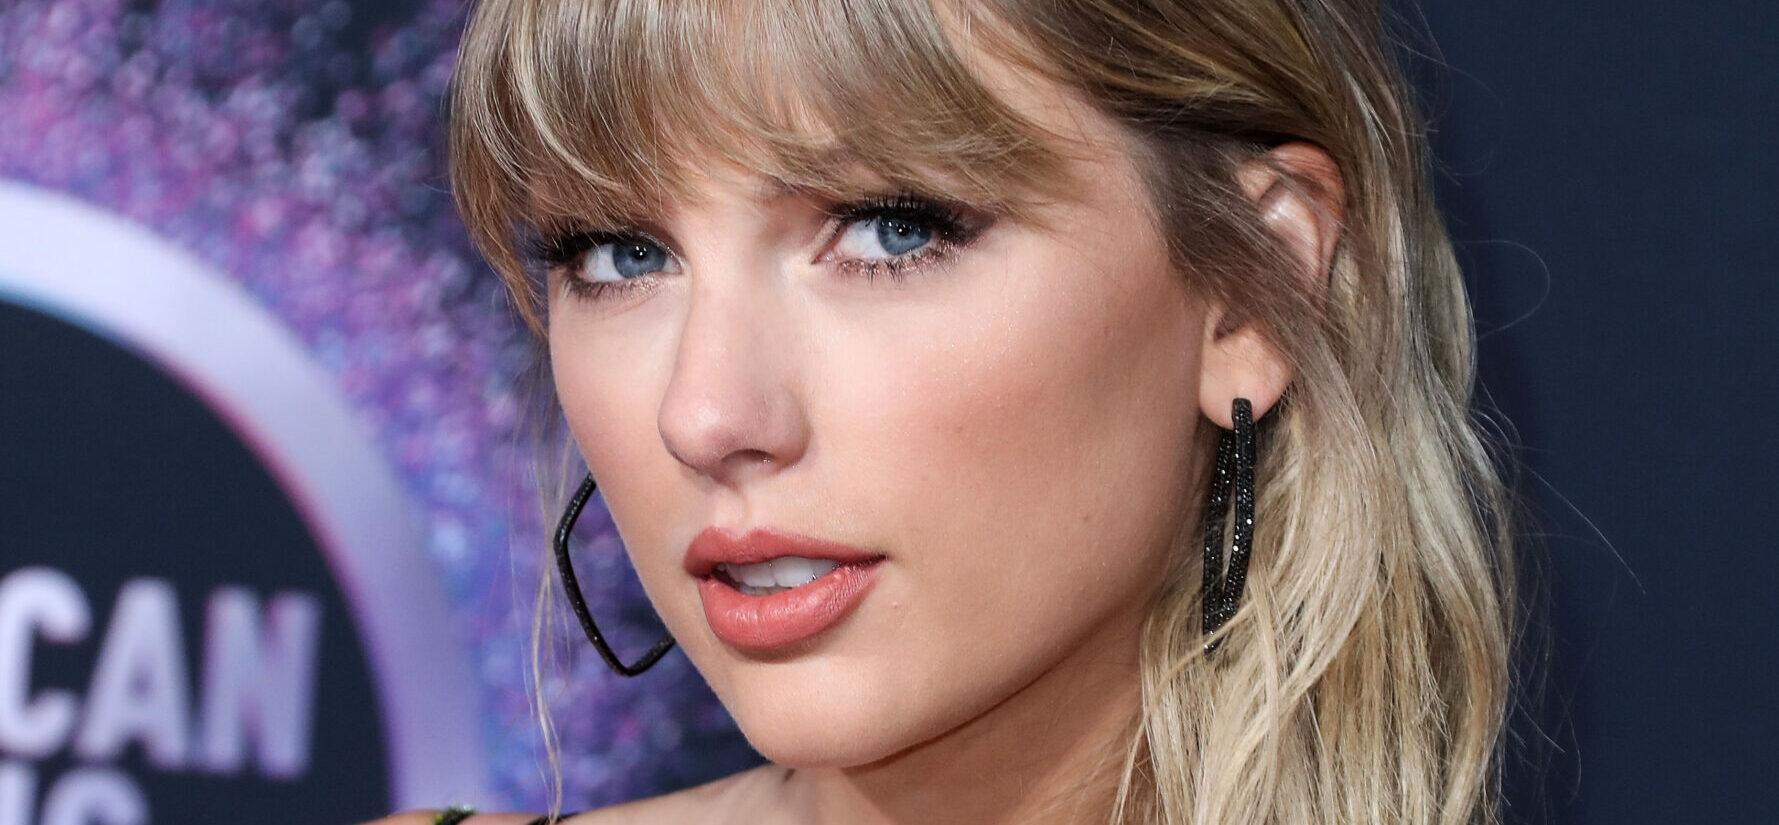 Taylor Swift at the 2019 American Music Awards - Arrivals